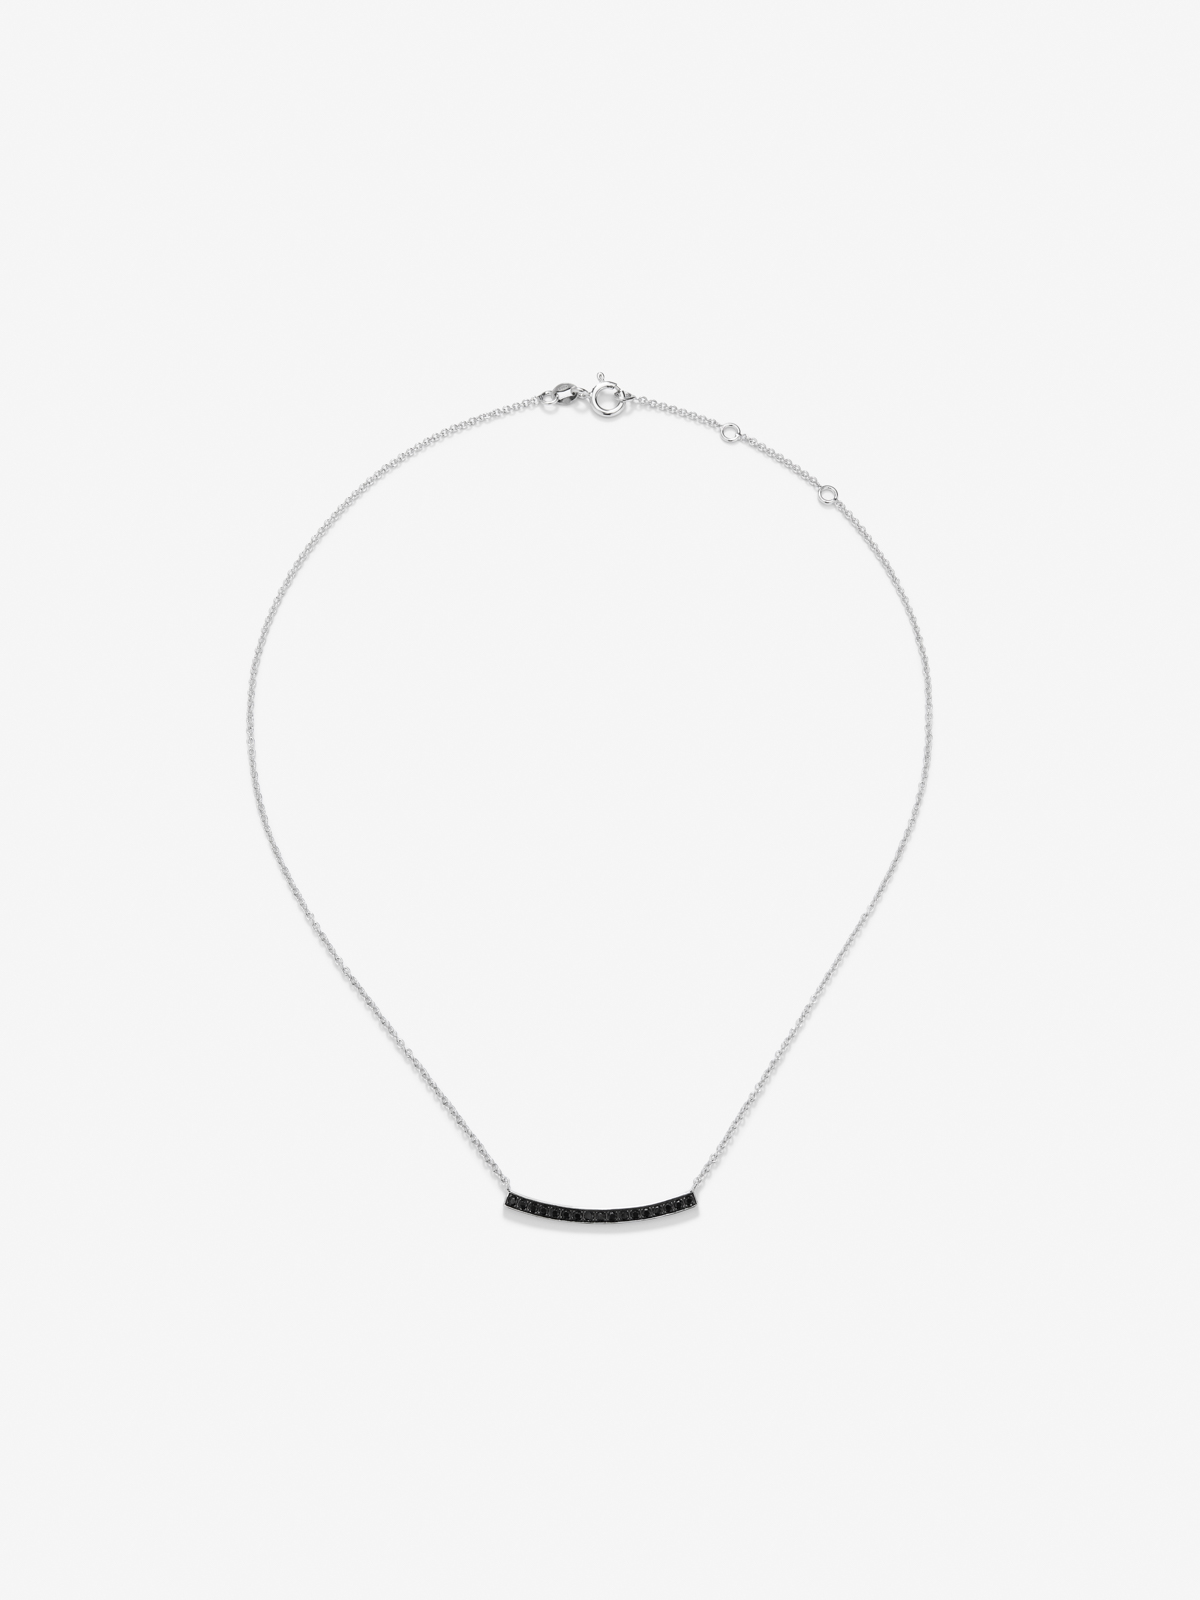 925 silver necklace with stars and black spinels in brilliant cut of 0.43 cts